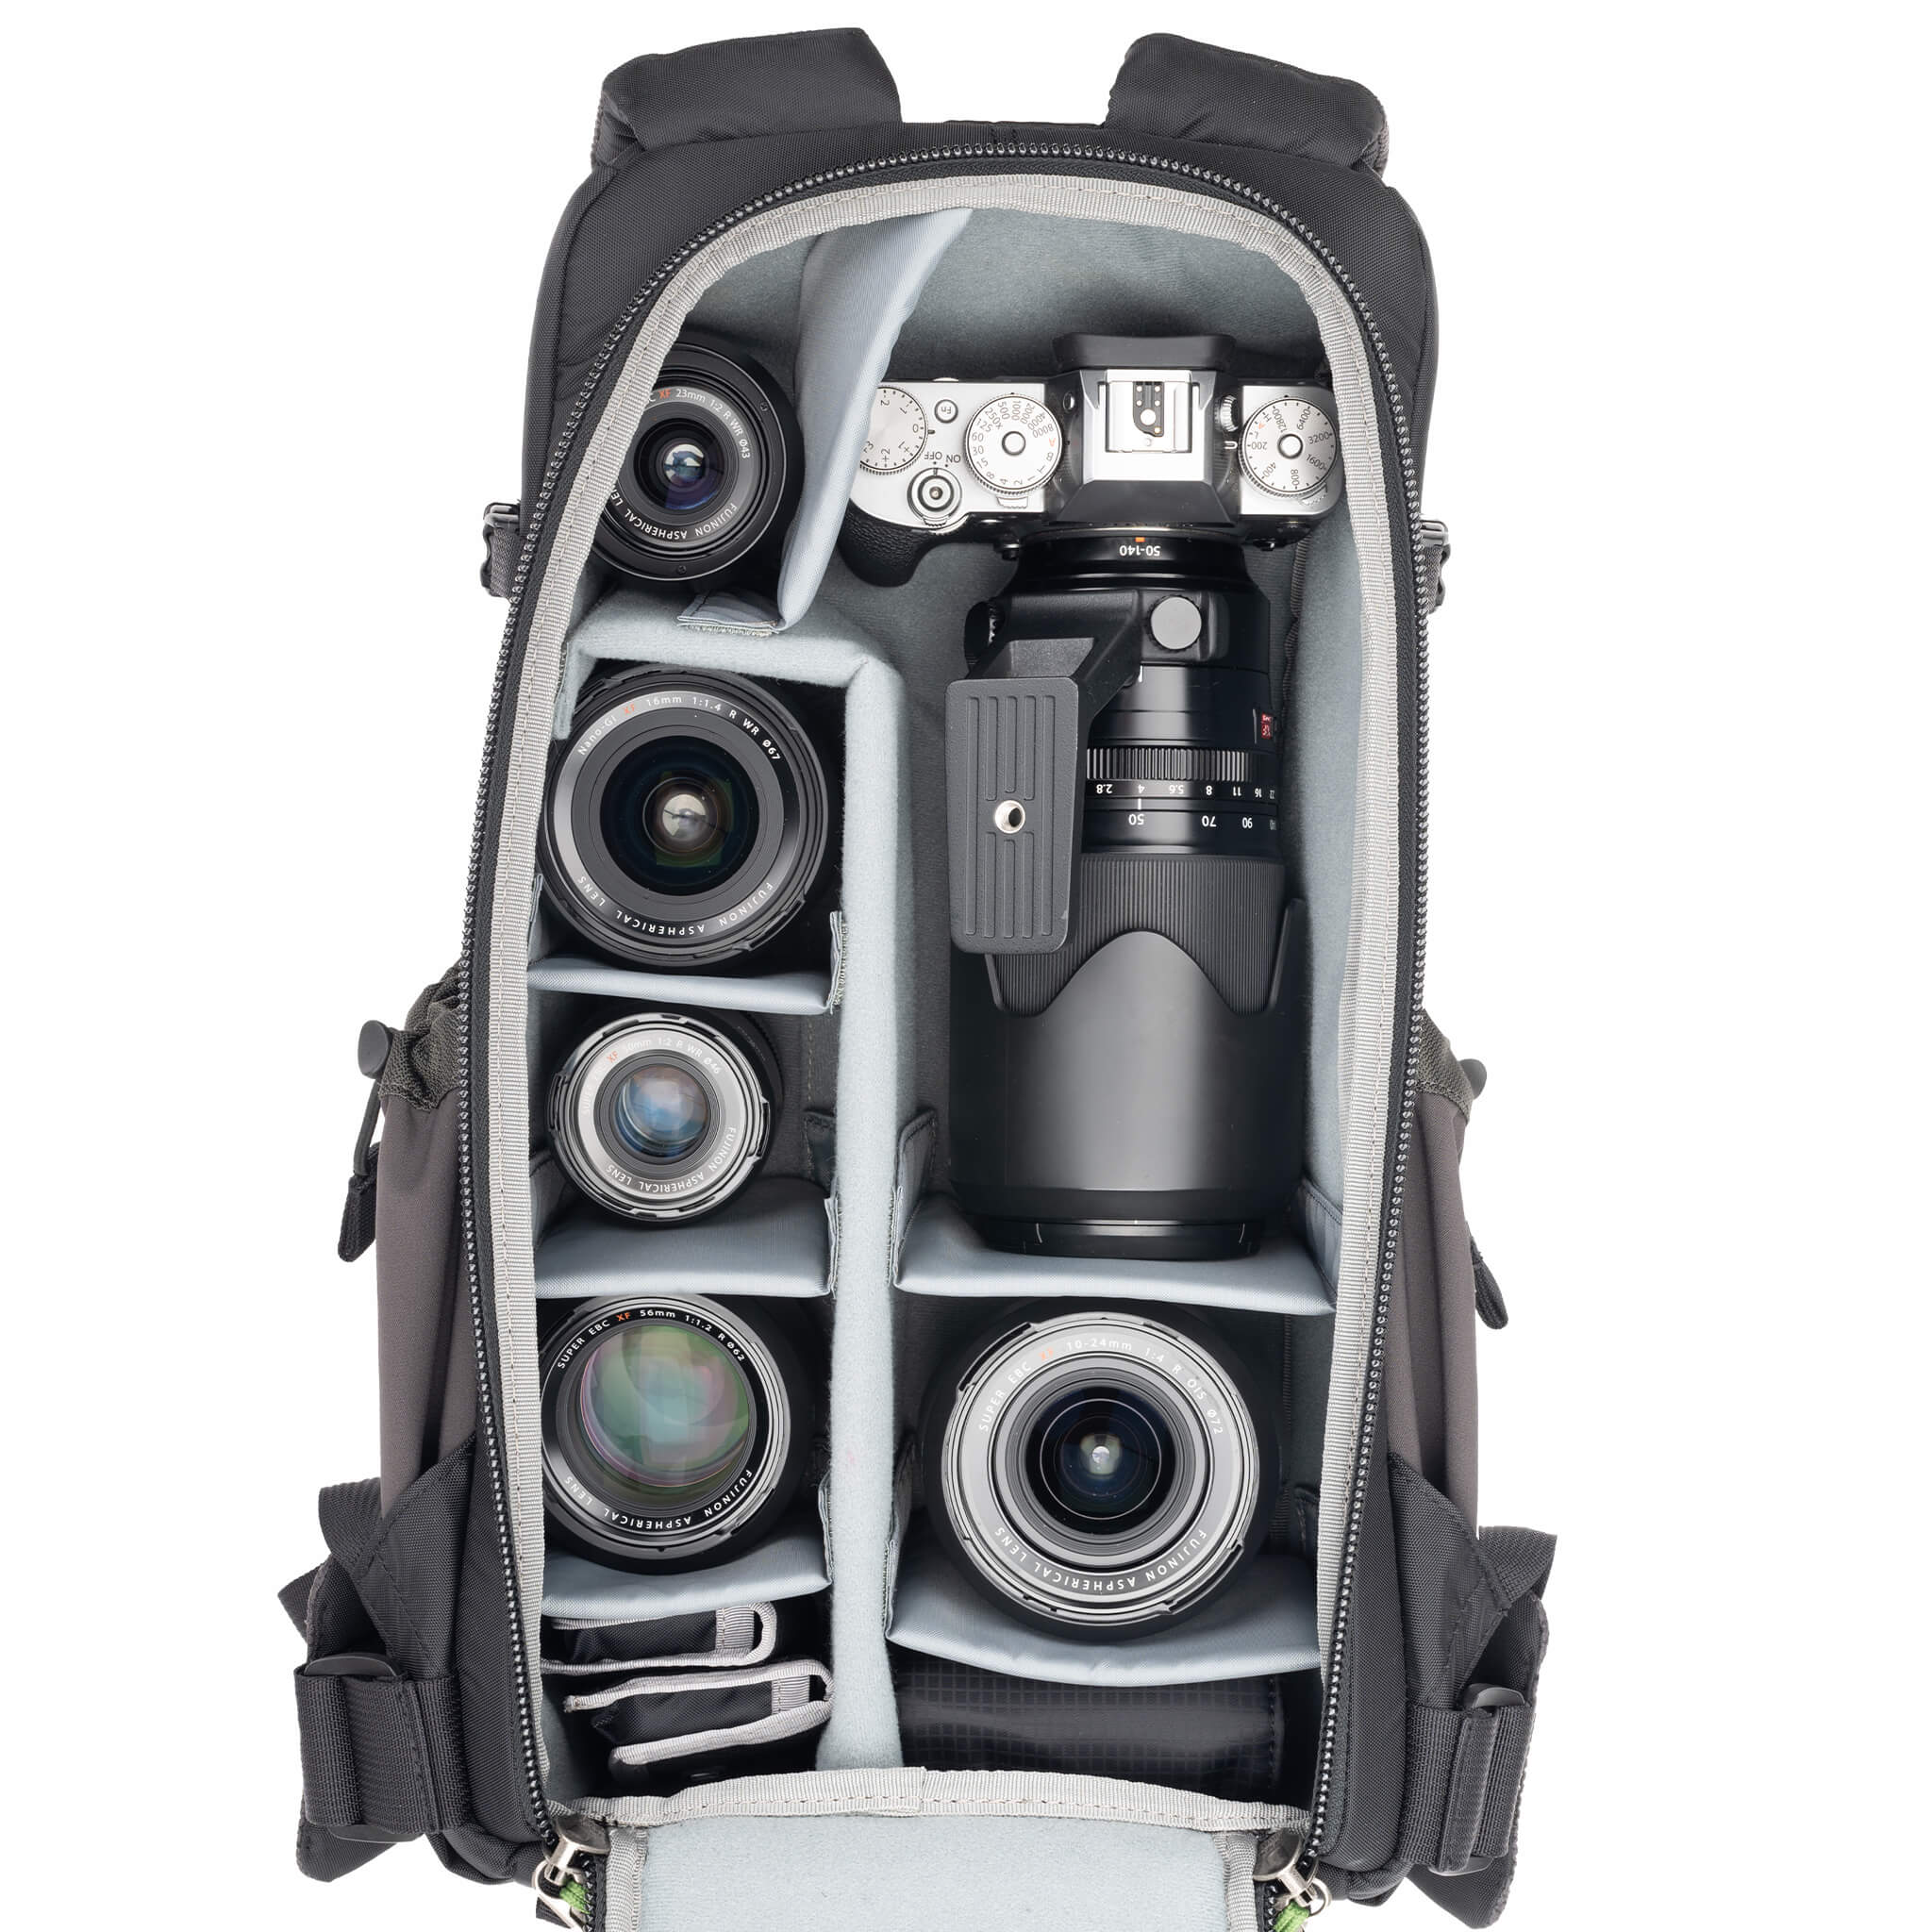 BackLight Sprint Holds a standard-sized camera body with lenses attached and 1–3 standard zoom lenses